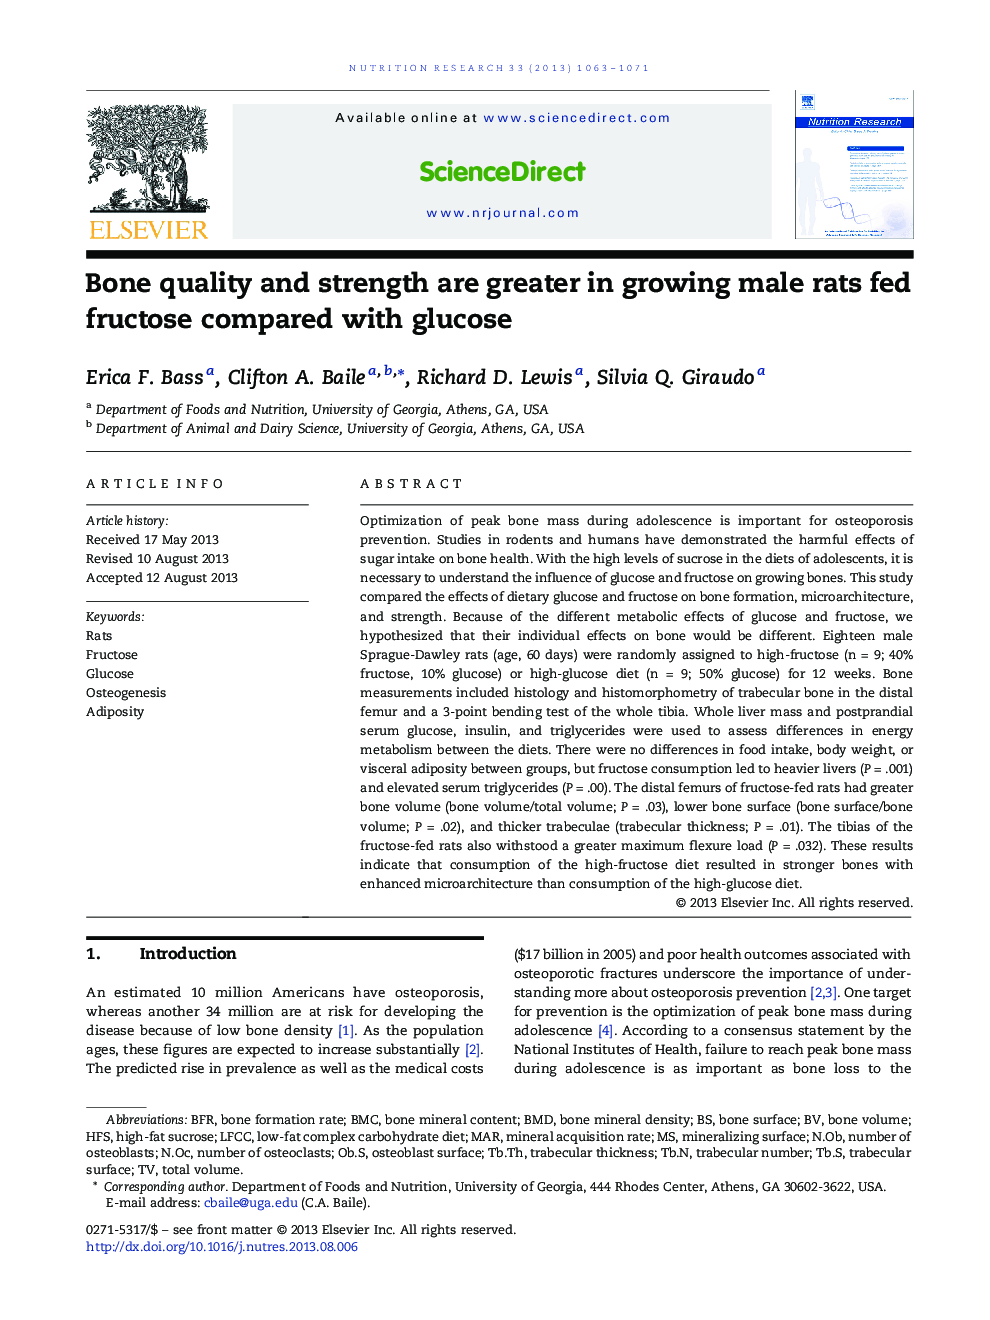 Bone quality and strength are greater in growing male rats fed fructose compared with glucose